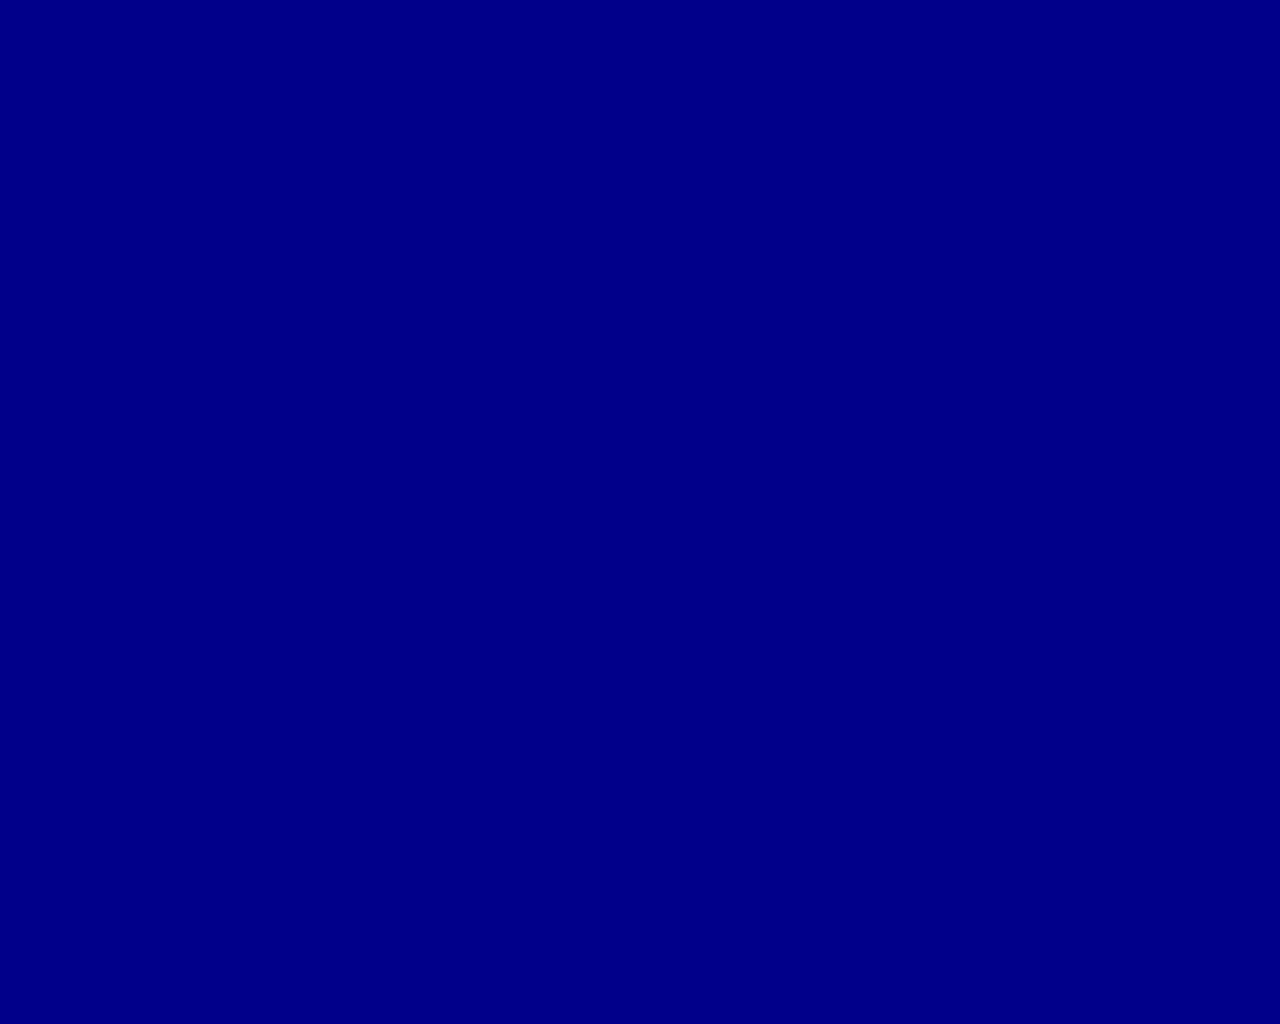 Resolution Dark Blue Solid Color Background And